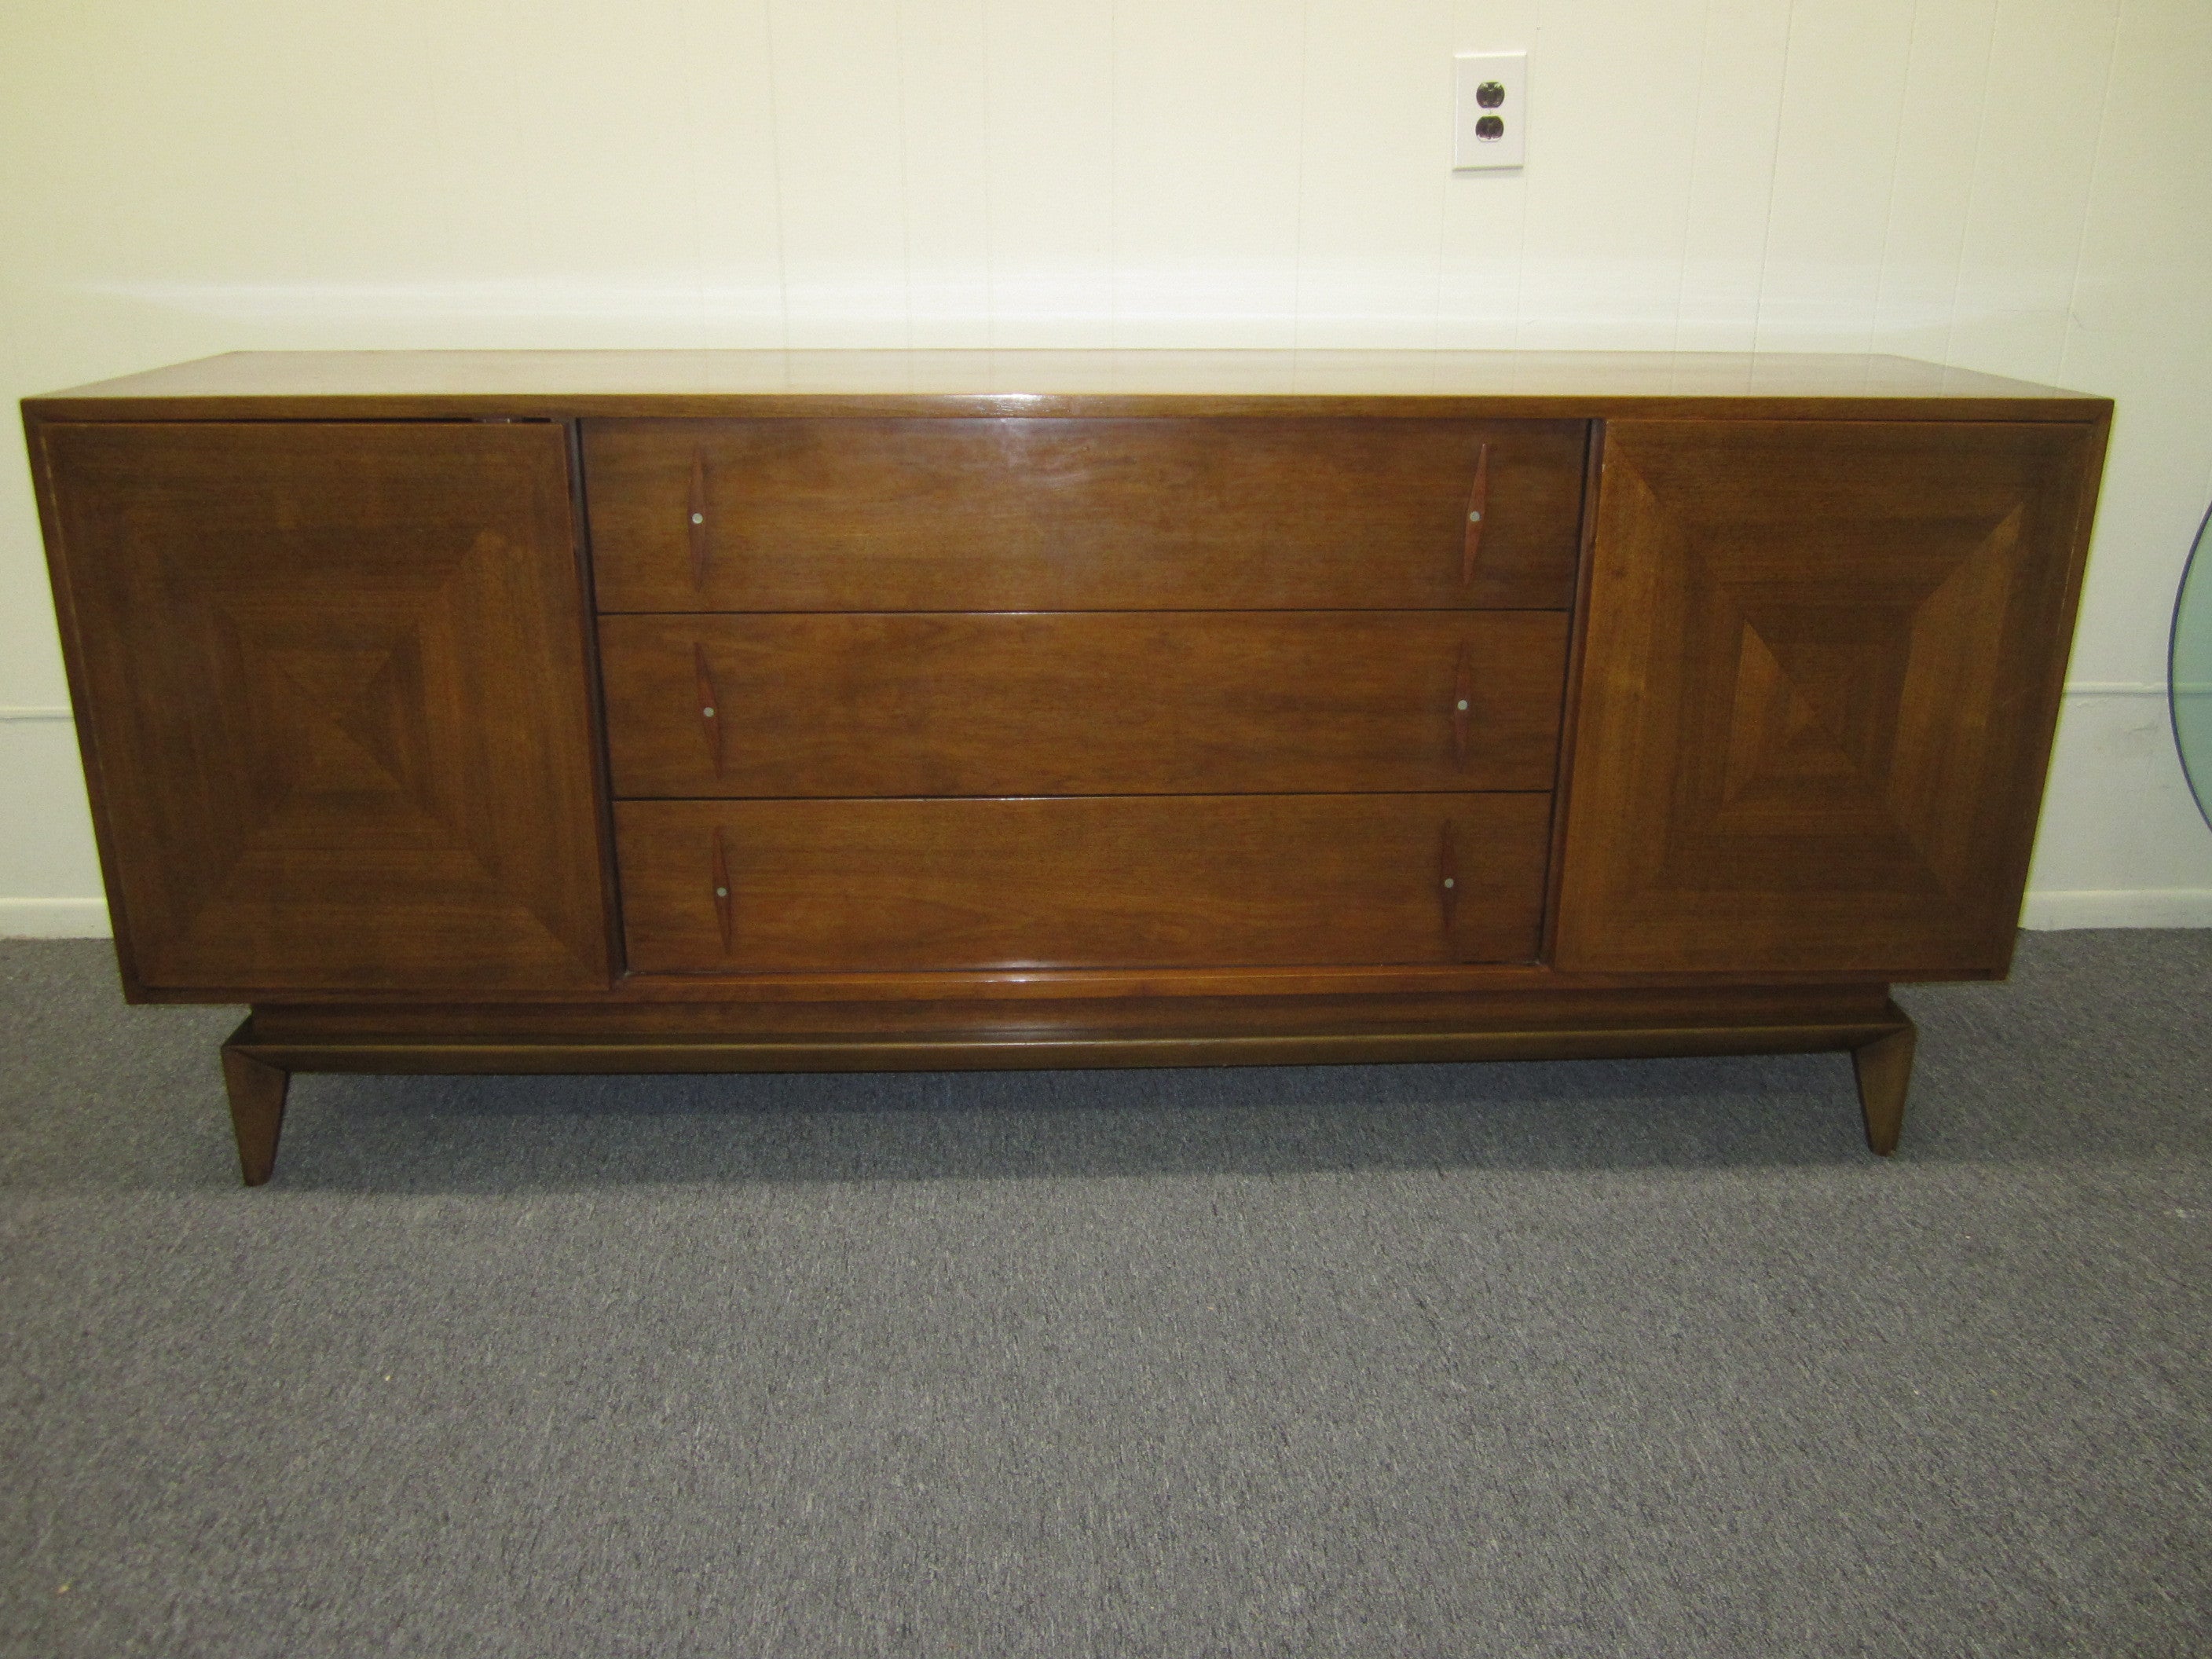 Geometric and Sculptural American of Martinsville Walnut Credenza Mid-century